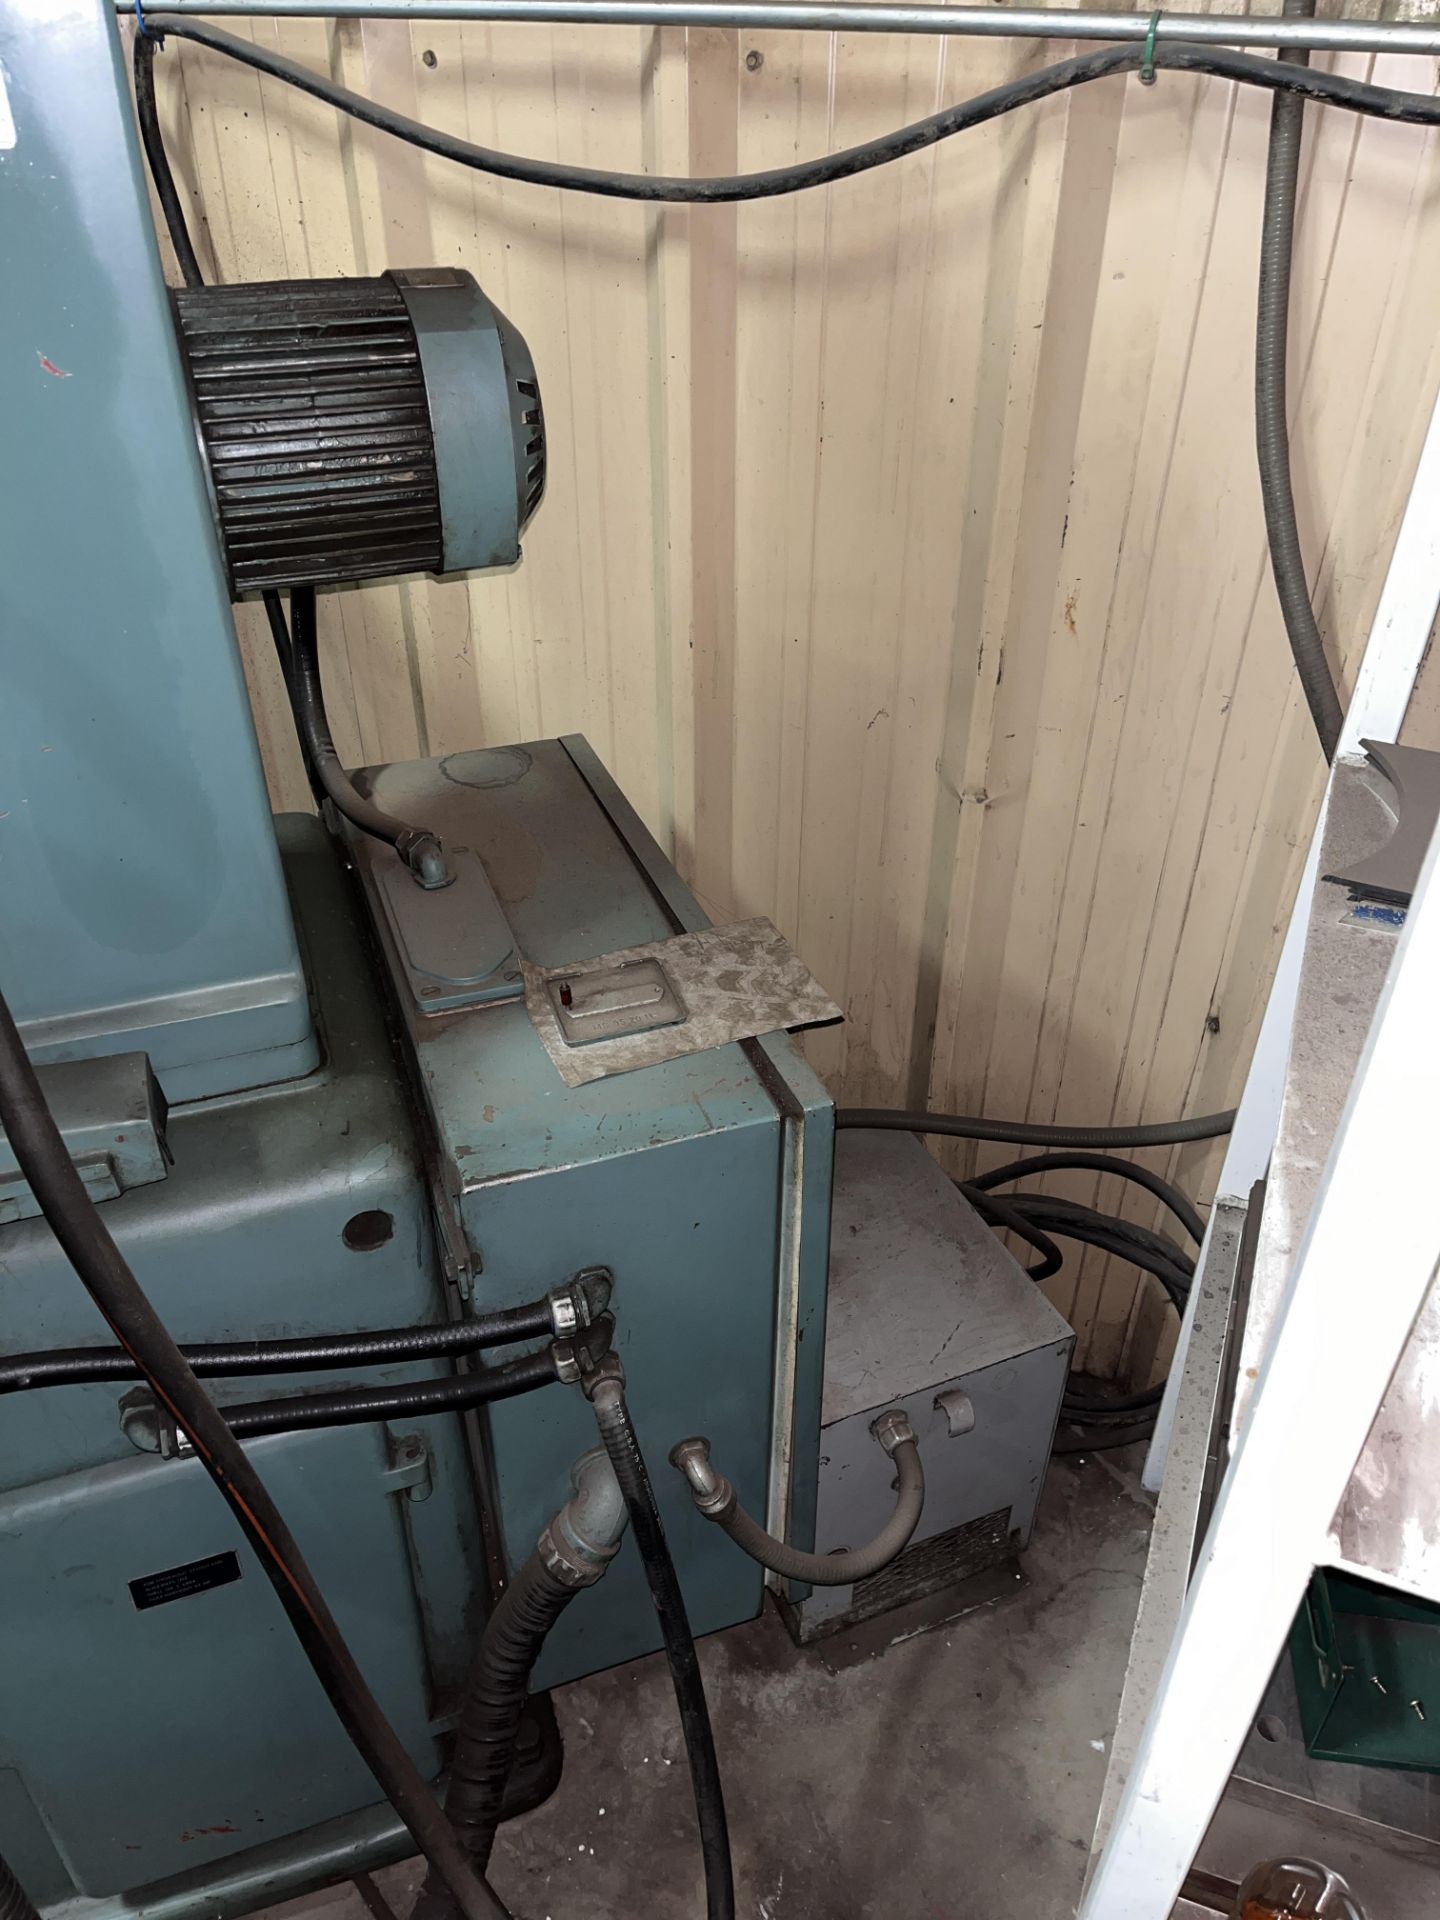 Malcus MPS-450 Surface Grinder, 6 x 18", Coolant, Model MPS-450, s/n 4028 - Image 7 of 8